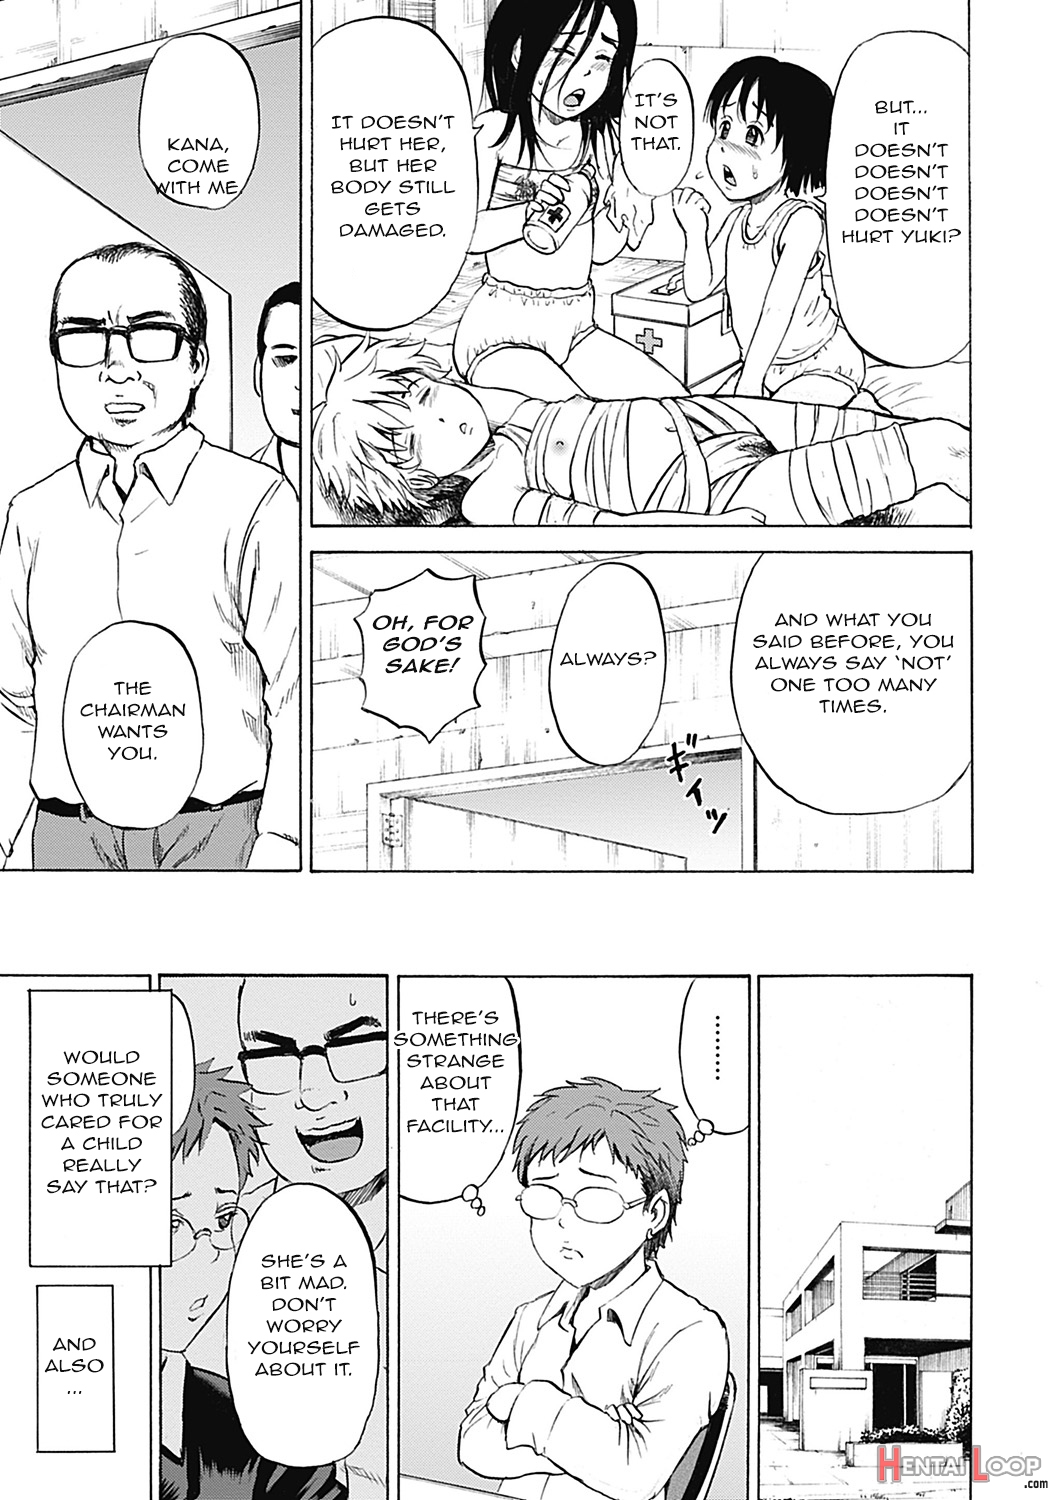 Sexually Tortured Girls Ch. 12 page 5